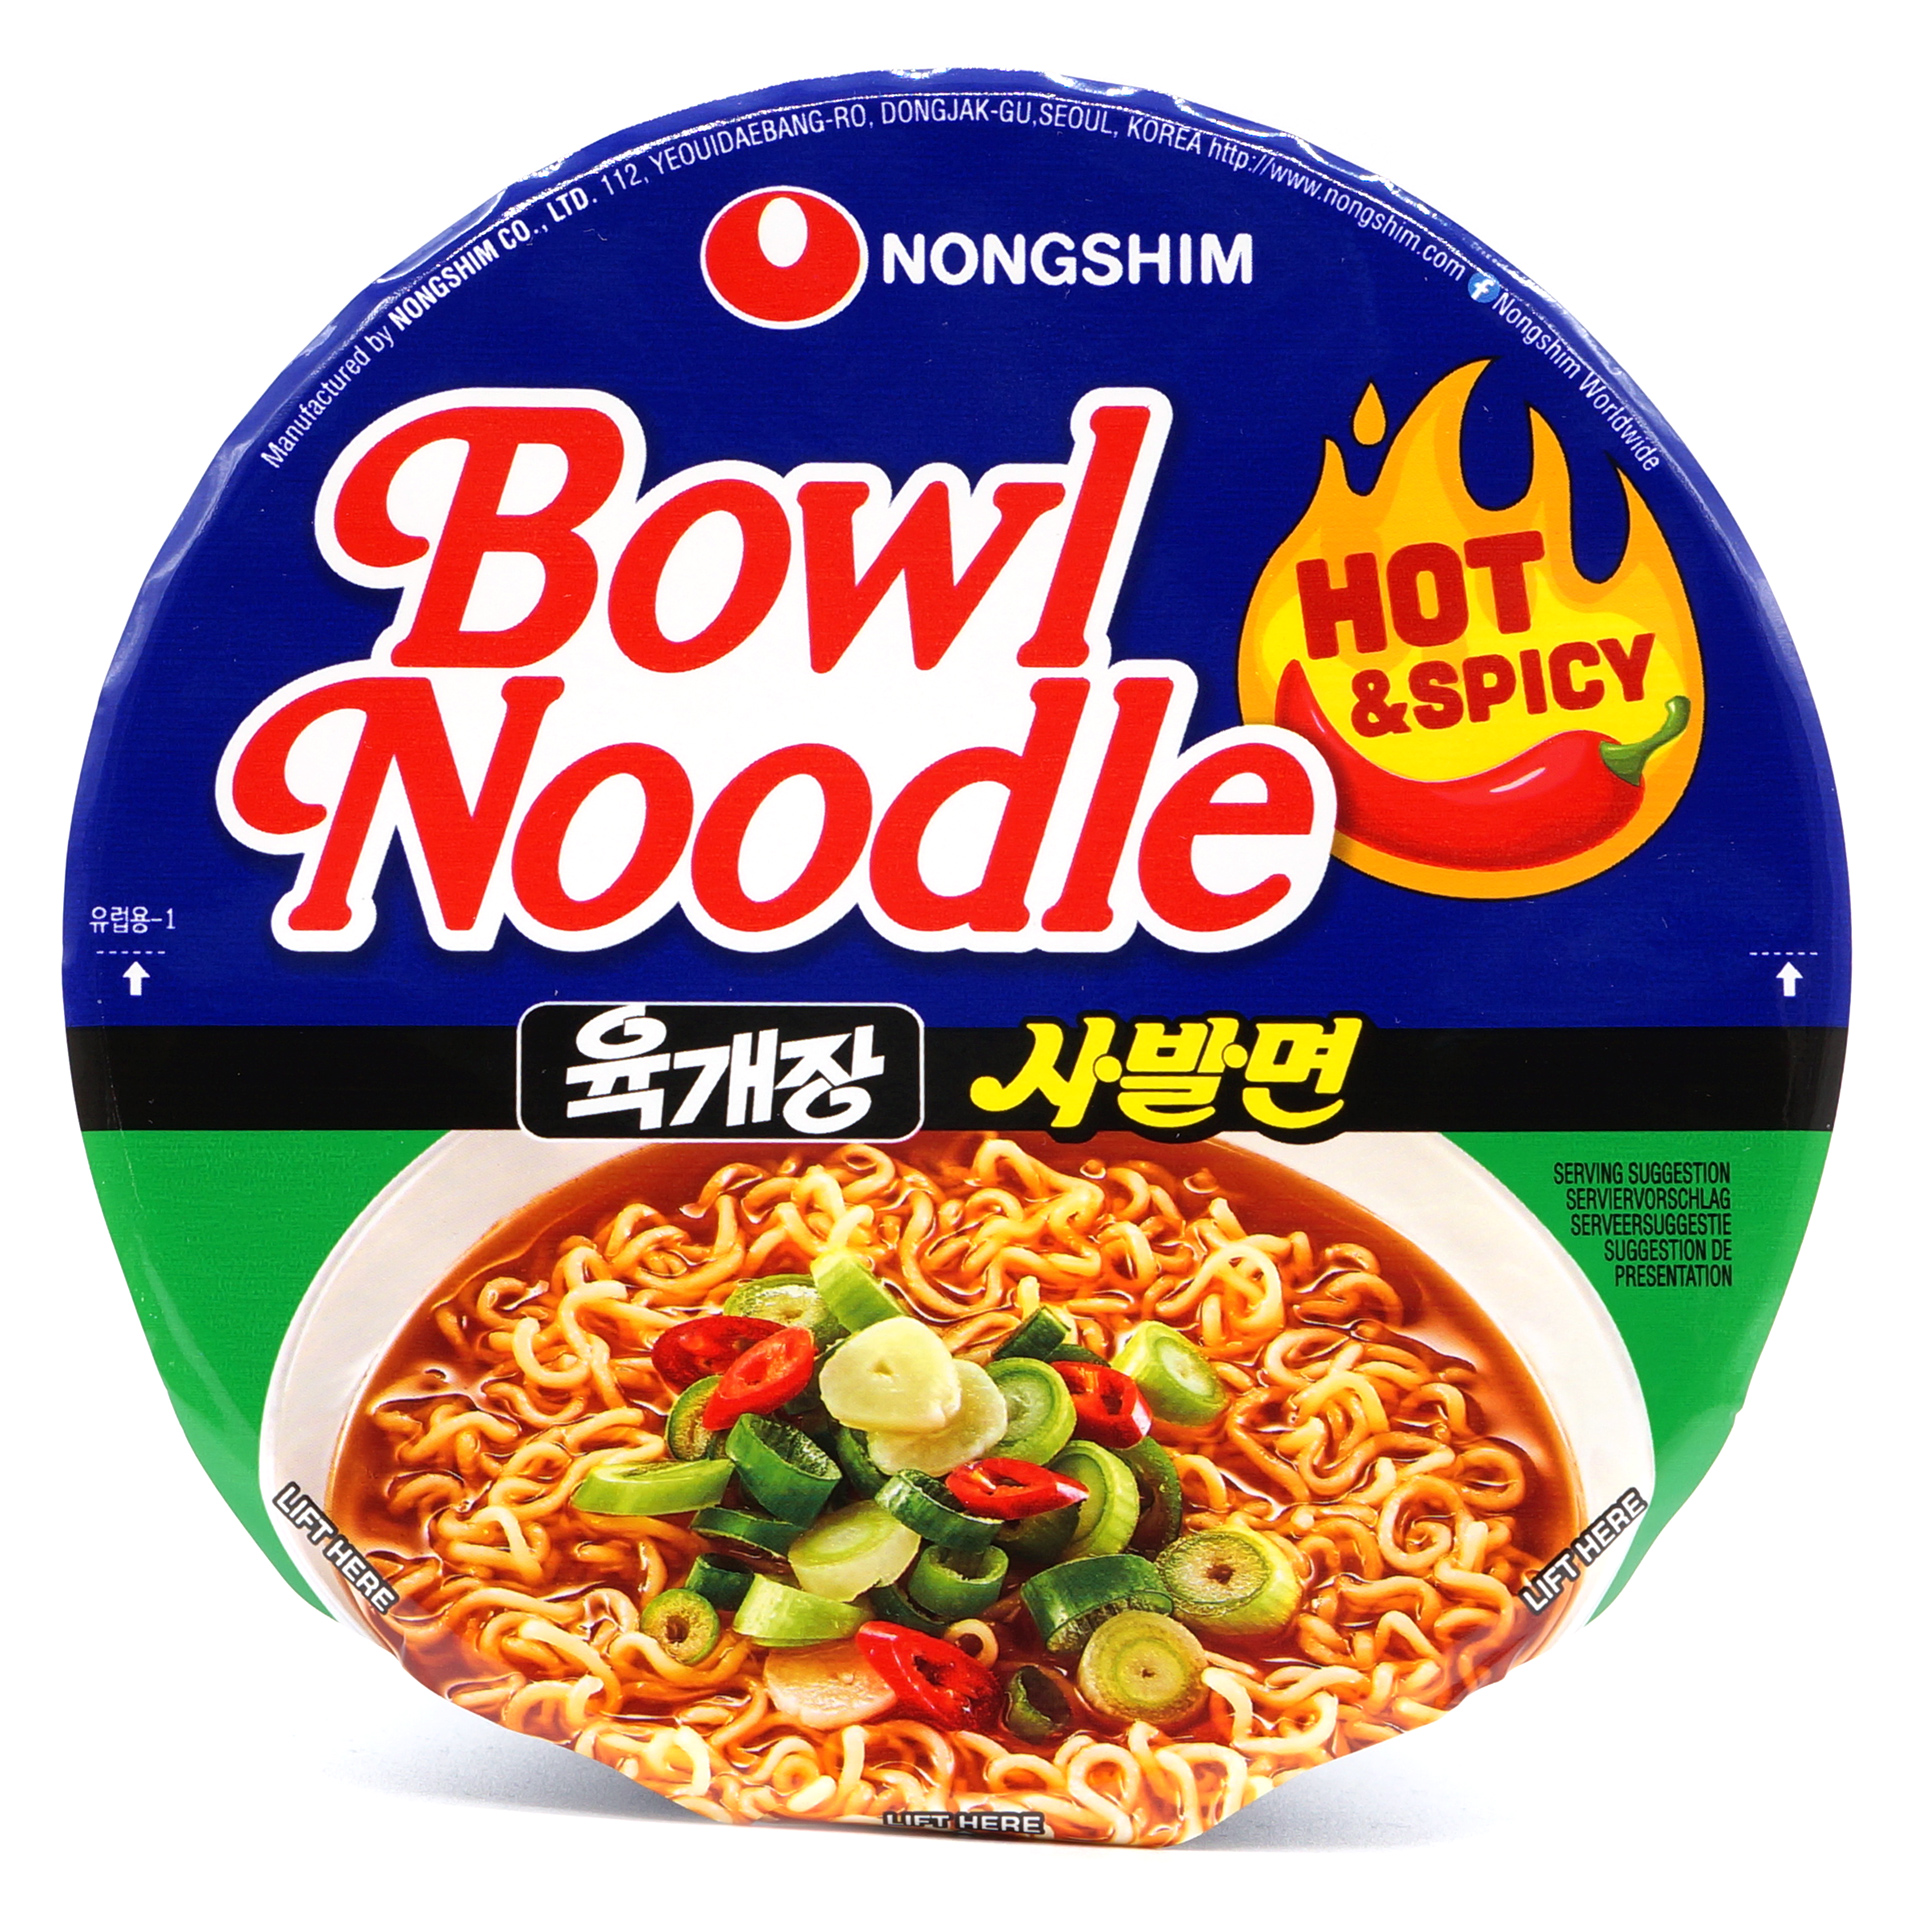 Bowl Noodle Hot & Spicy - Nong Shim - 100g